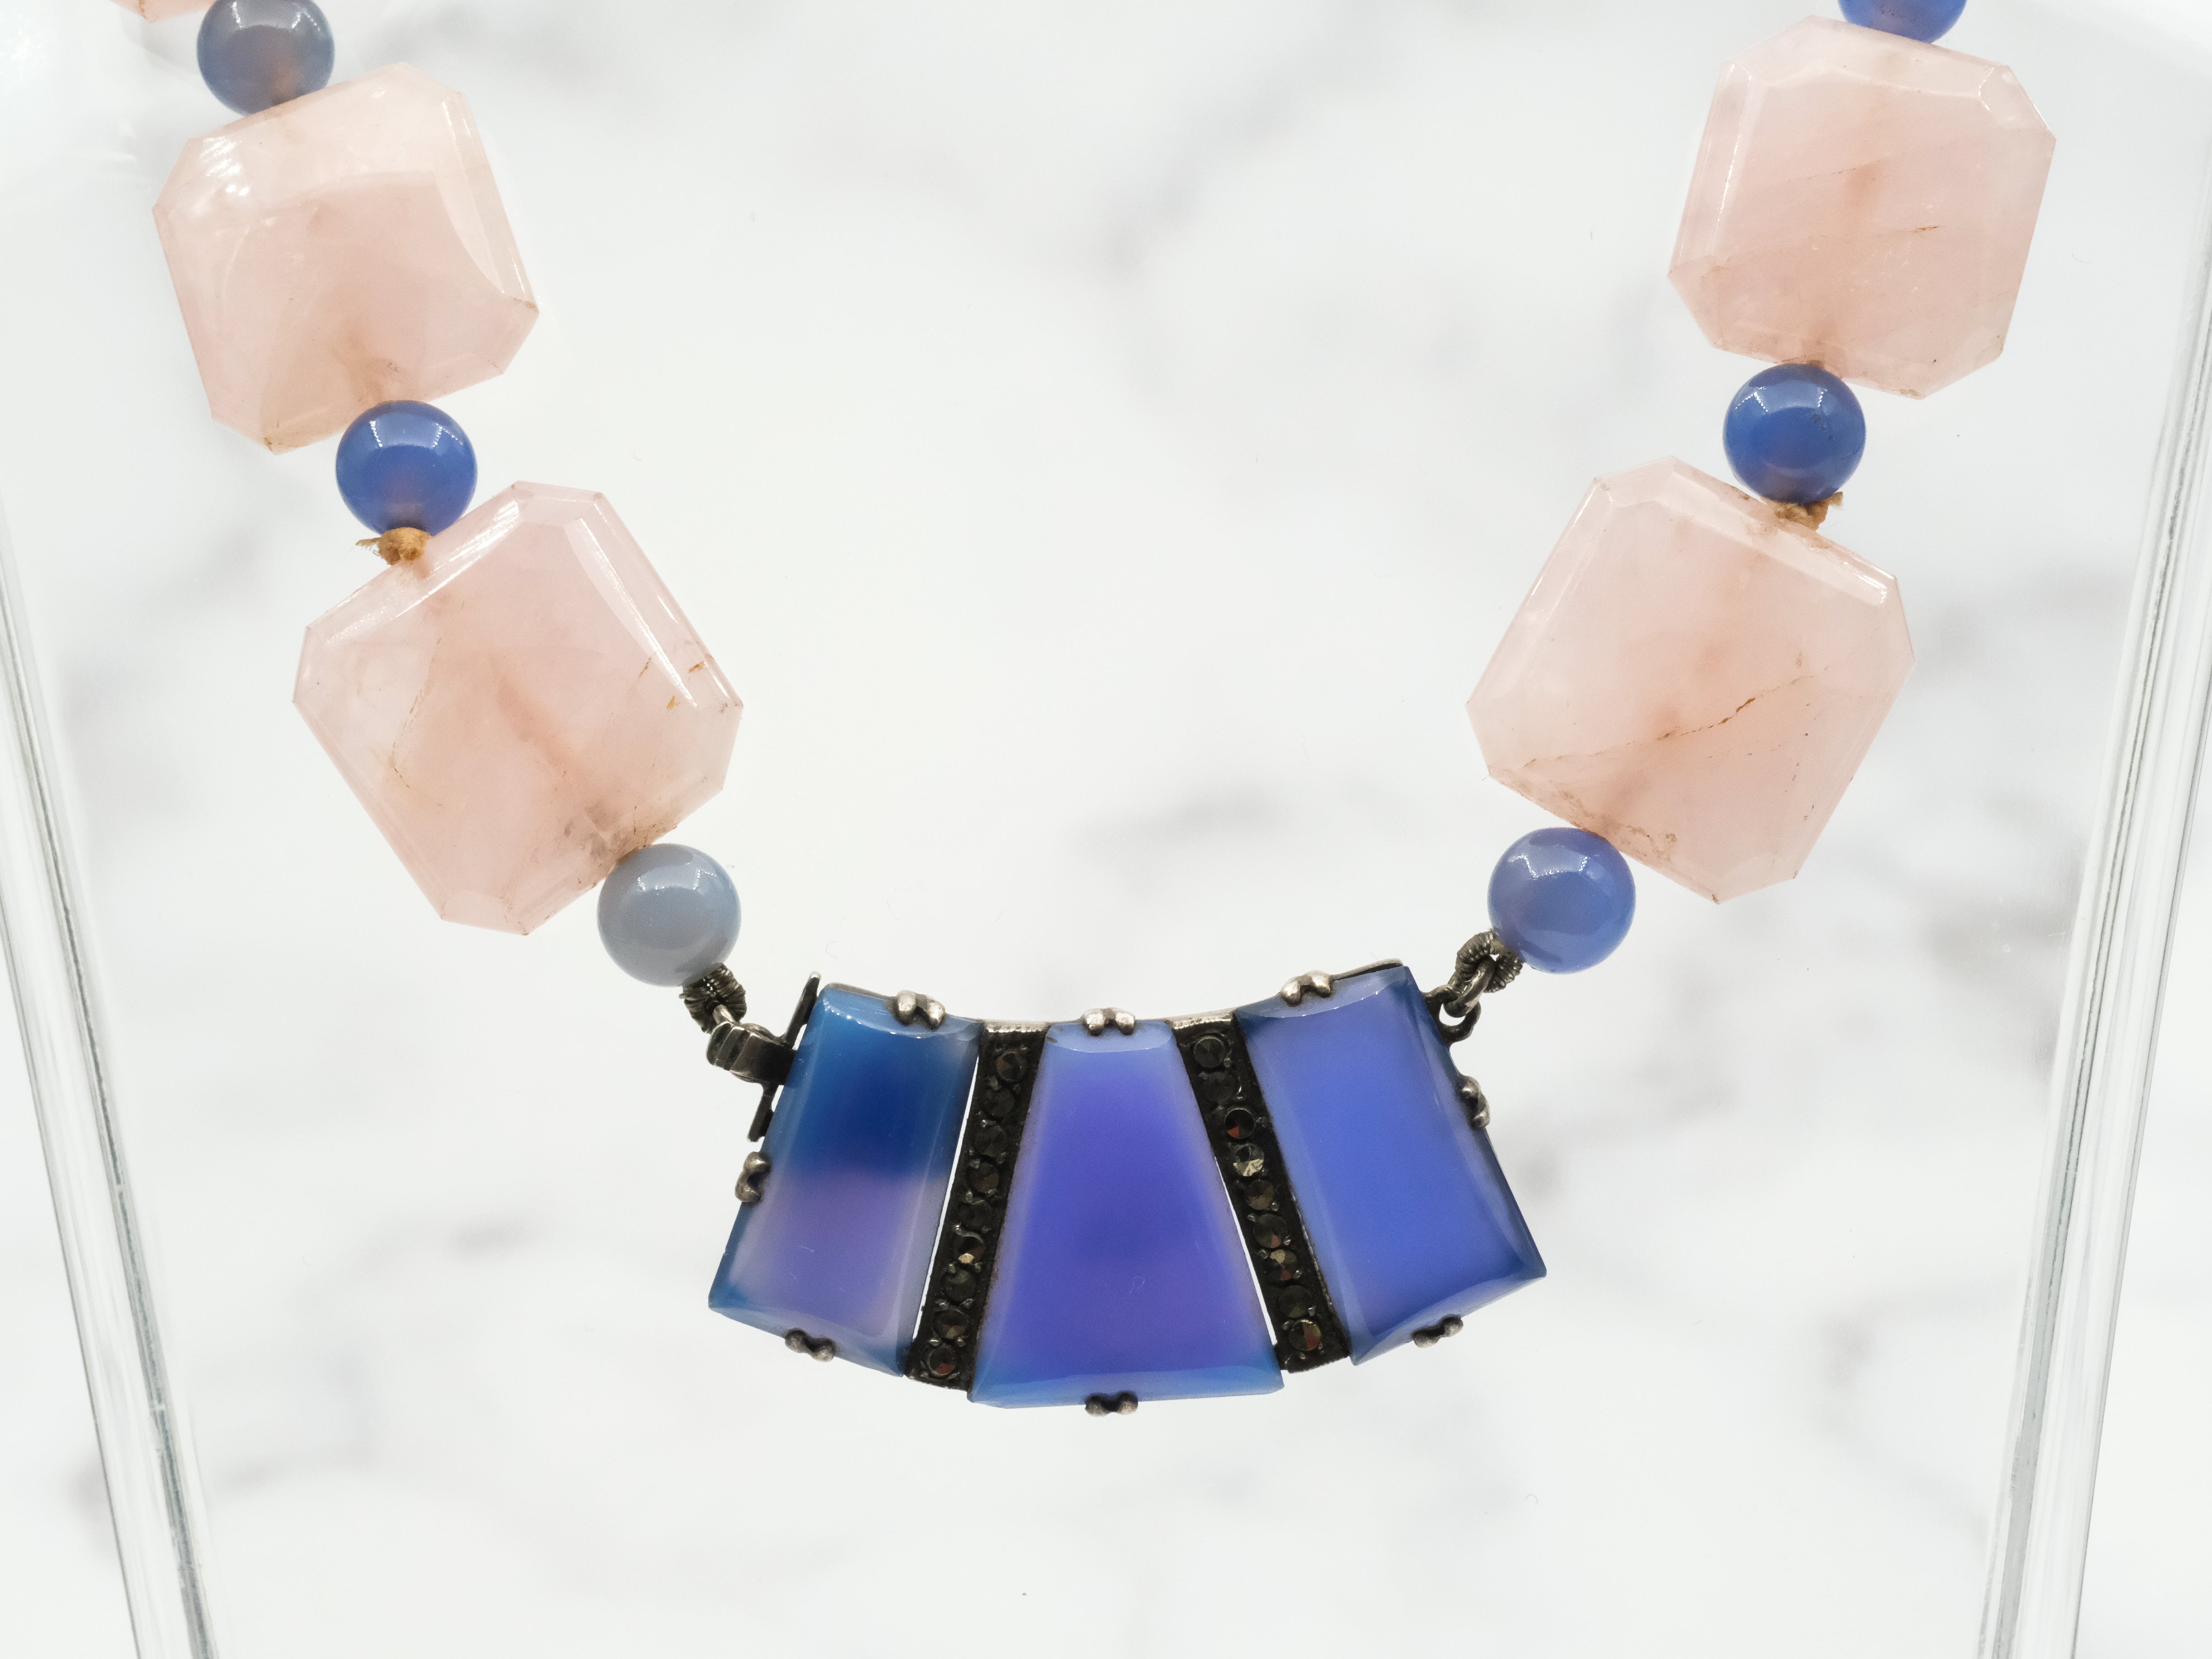 Incredible antique German Art Deco rose quartz and blue chalcedony necklace with sterling and marcasite statement clasp